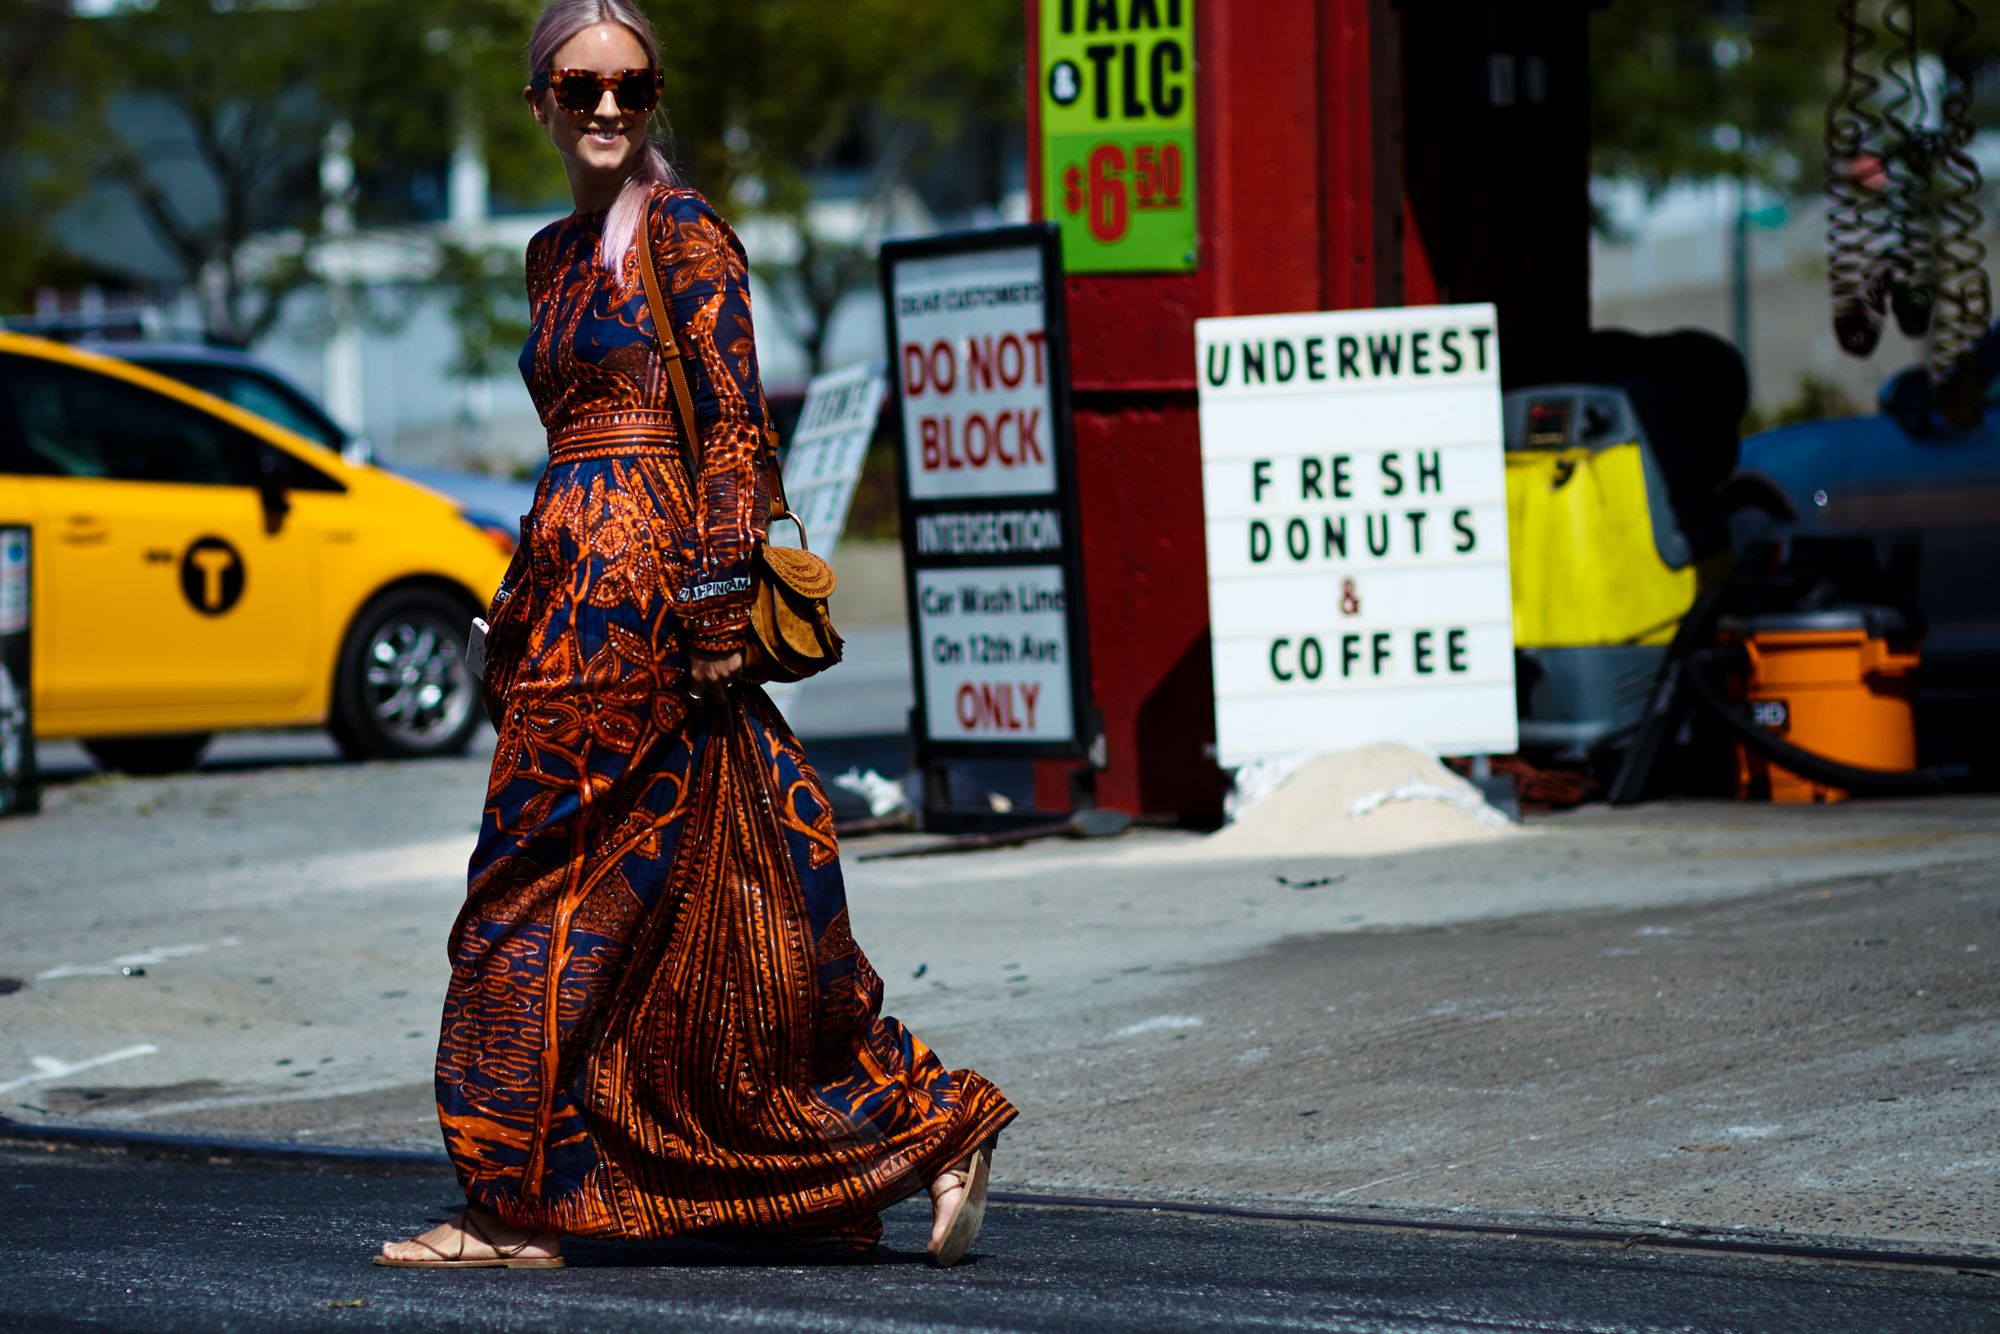 NYFW Spring-Summer 2017 Streetstyle: Blogger Charlotte Groeneveld wearing a long Valentino dress, Chloe Bag and flat sandals after a show in New York City